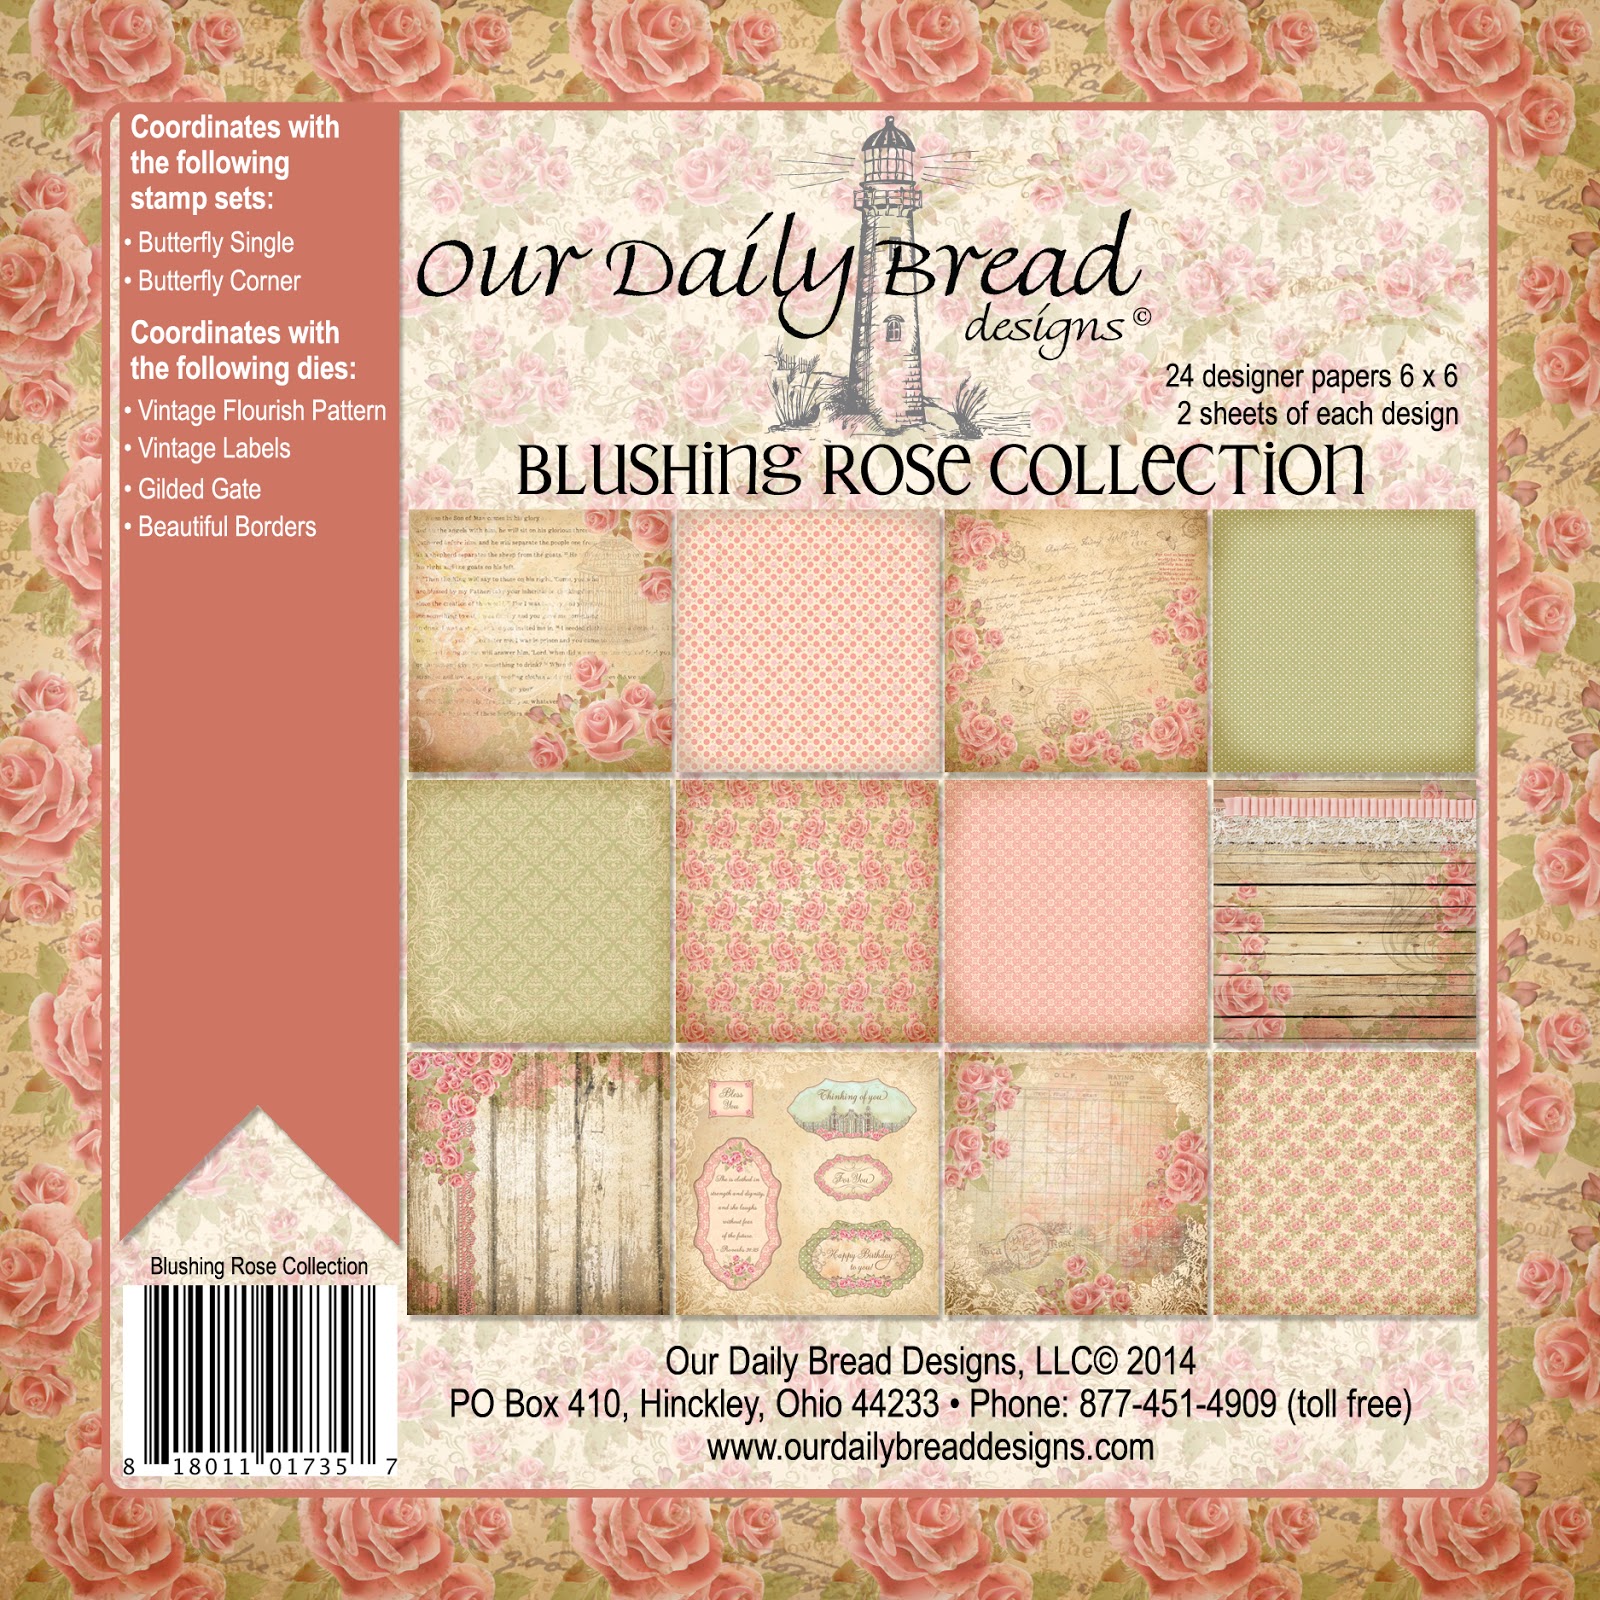 http://www.ourdailybreaddesigns.com/index.php/blushing-rose-collection-6x6-paper-pad.html